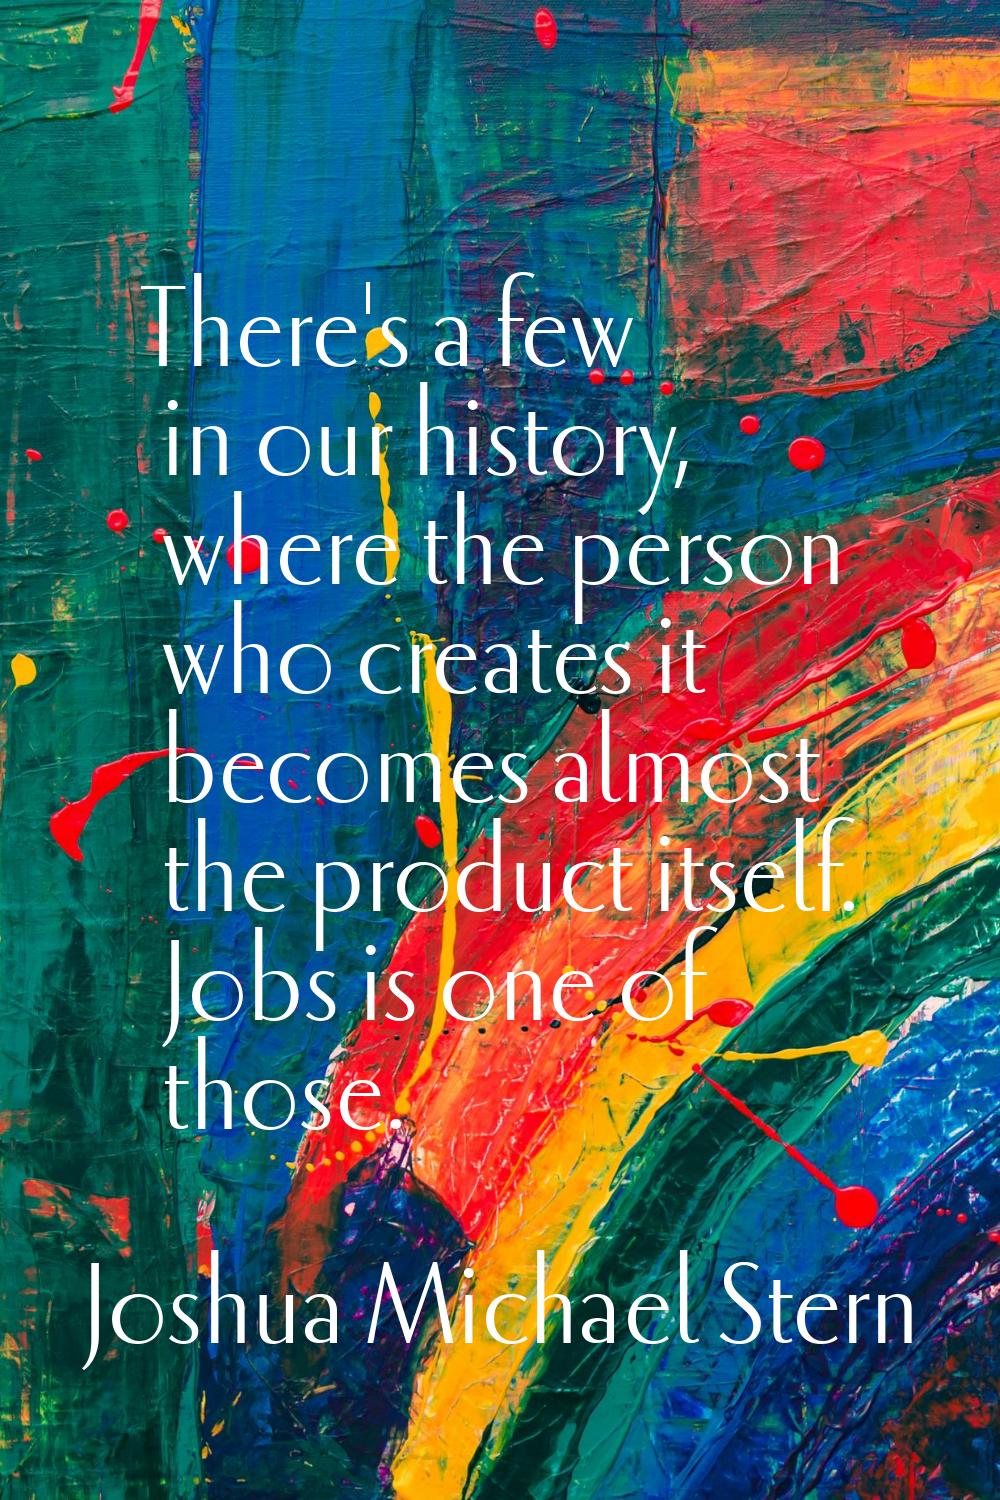 There's a few in our history, where the person who creates it becomes almost the product itself. Jo